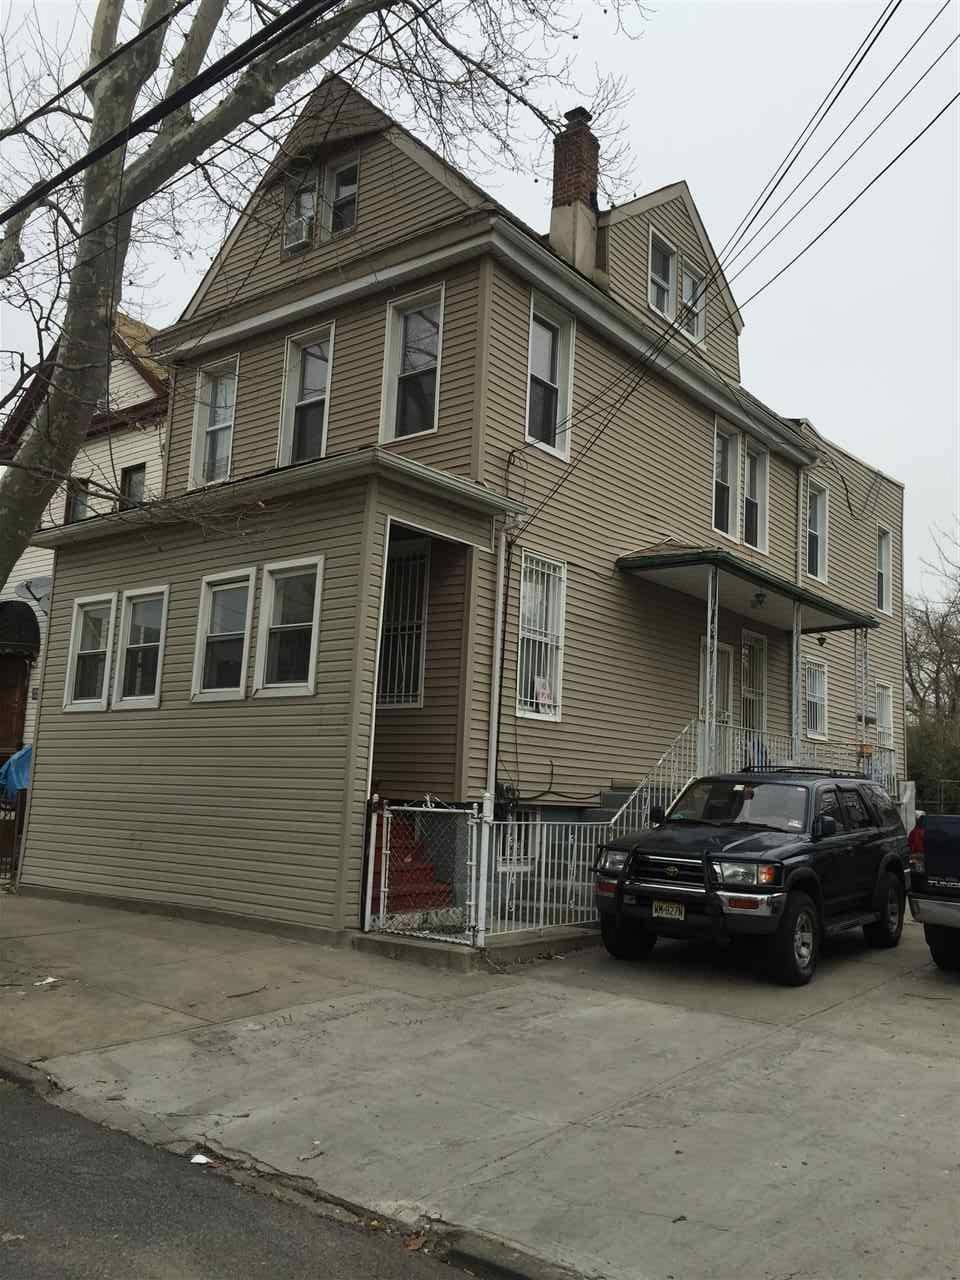 2bed 1ba apartment ready for April 15 - 2 BR New Jersey